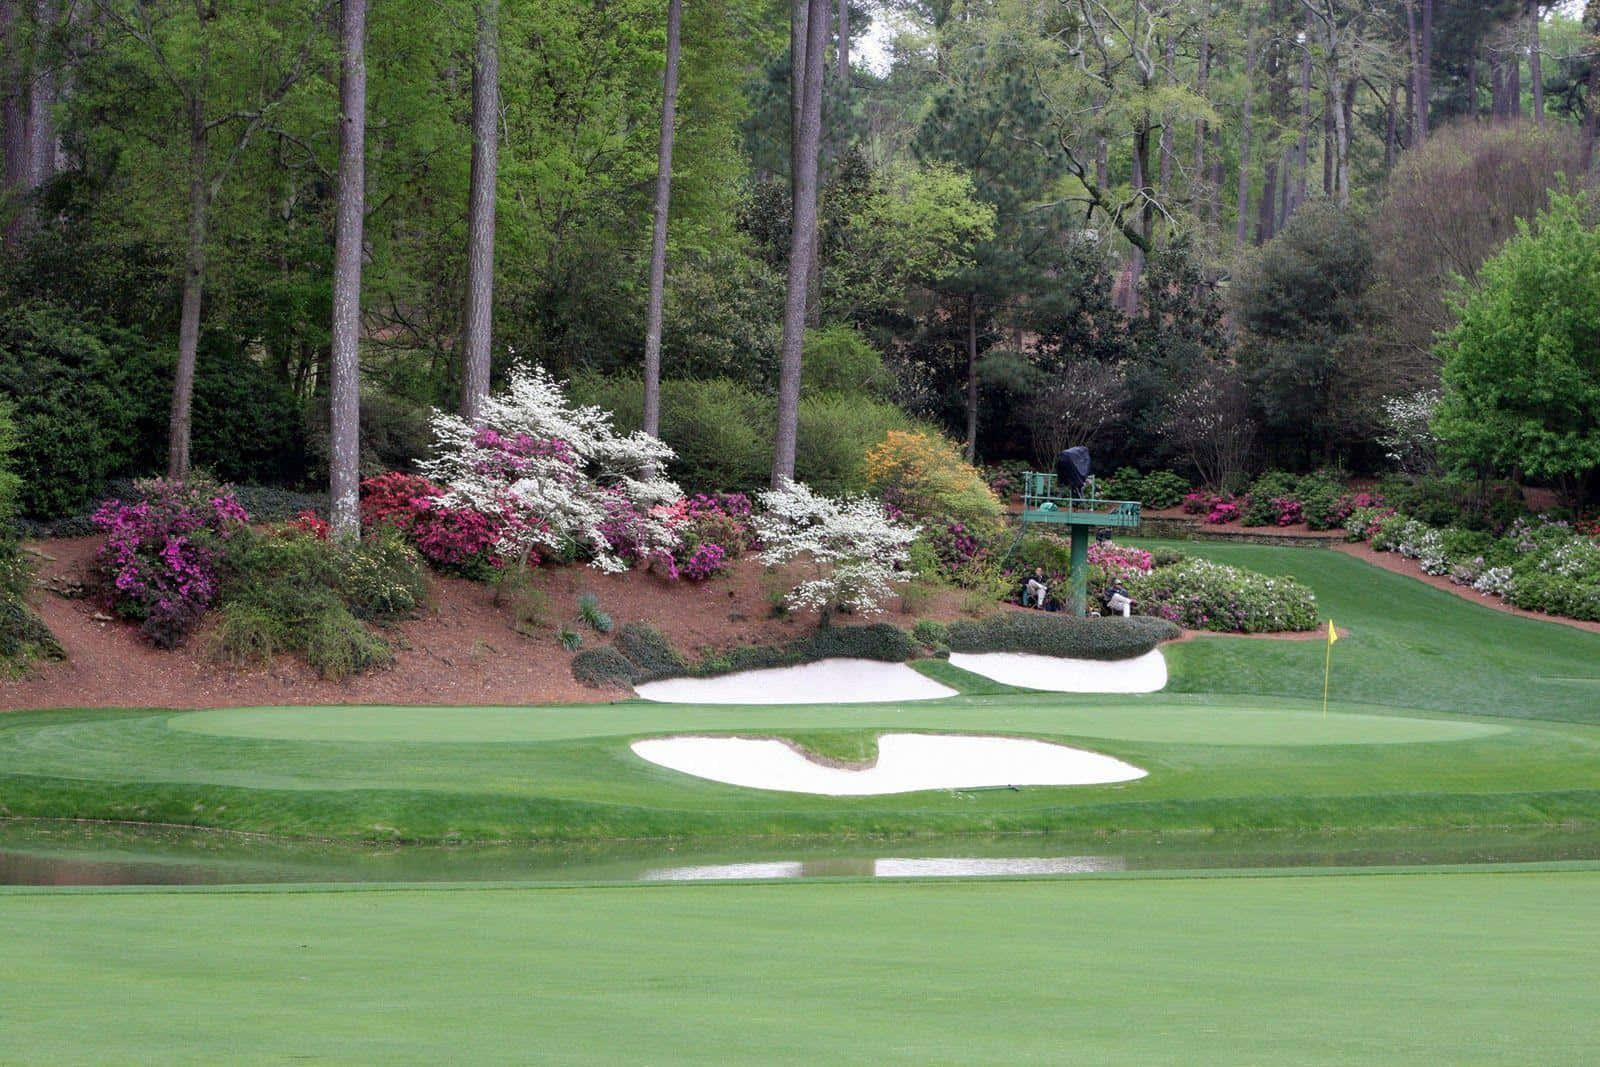 Exciting scenes of golf at the iconic Augusta National Wallpaper